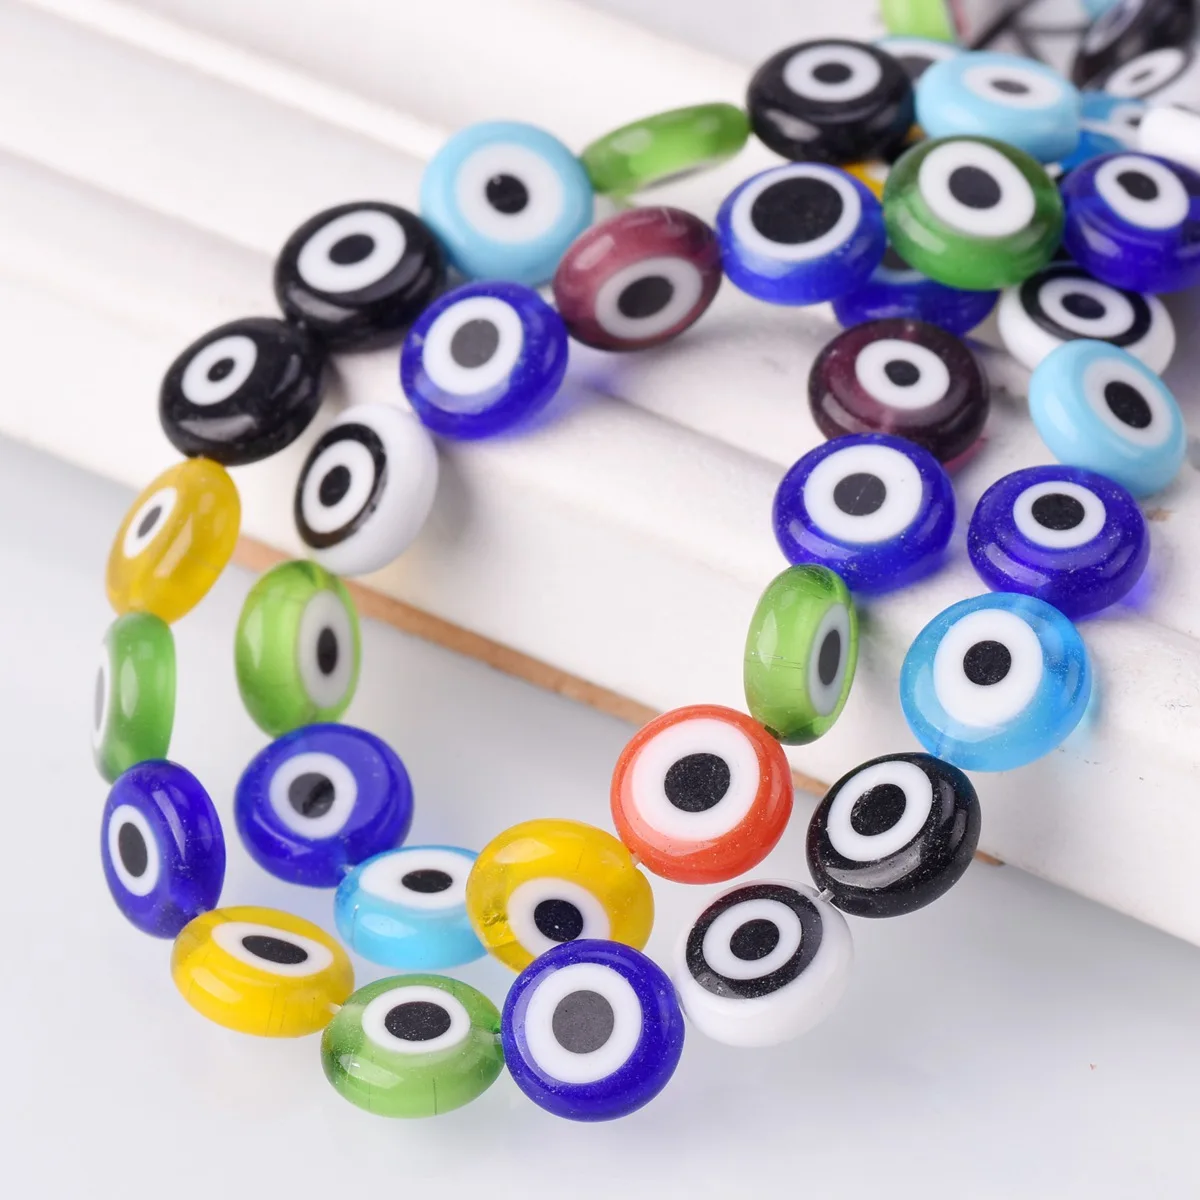 6mm 8mm 10mm 12mm Mixed Flat Round Evil Eye Millefiori Lampwork Glass Beads For Jewelry Making DIY Crafts Findings 1pcs auspicious sign flat round shape 26mm handmade lampwork glass loose beads for jewelry making diy crafts findings